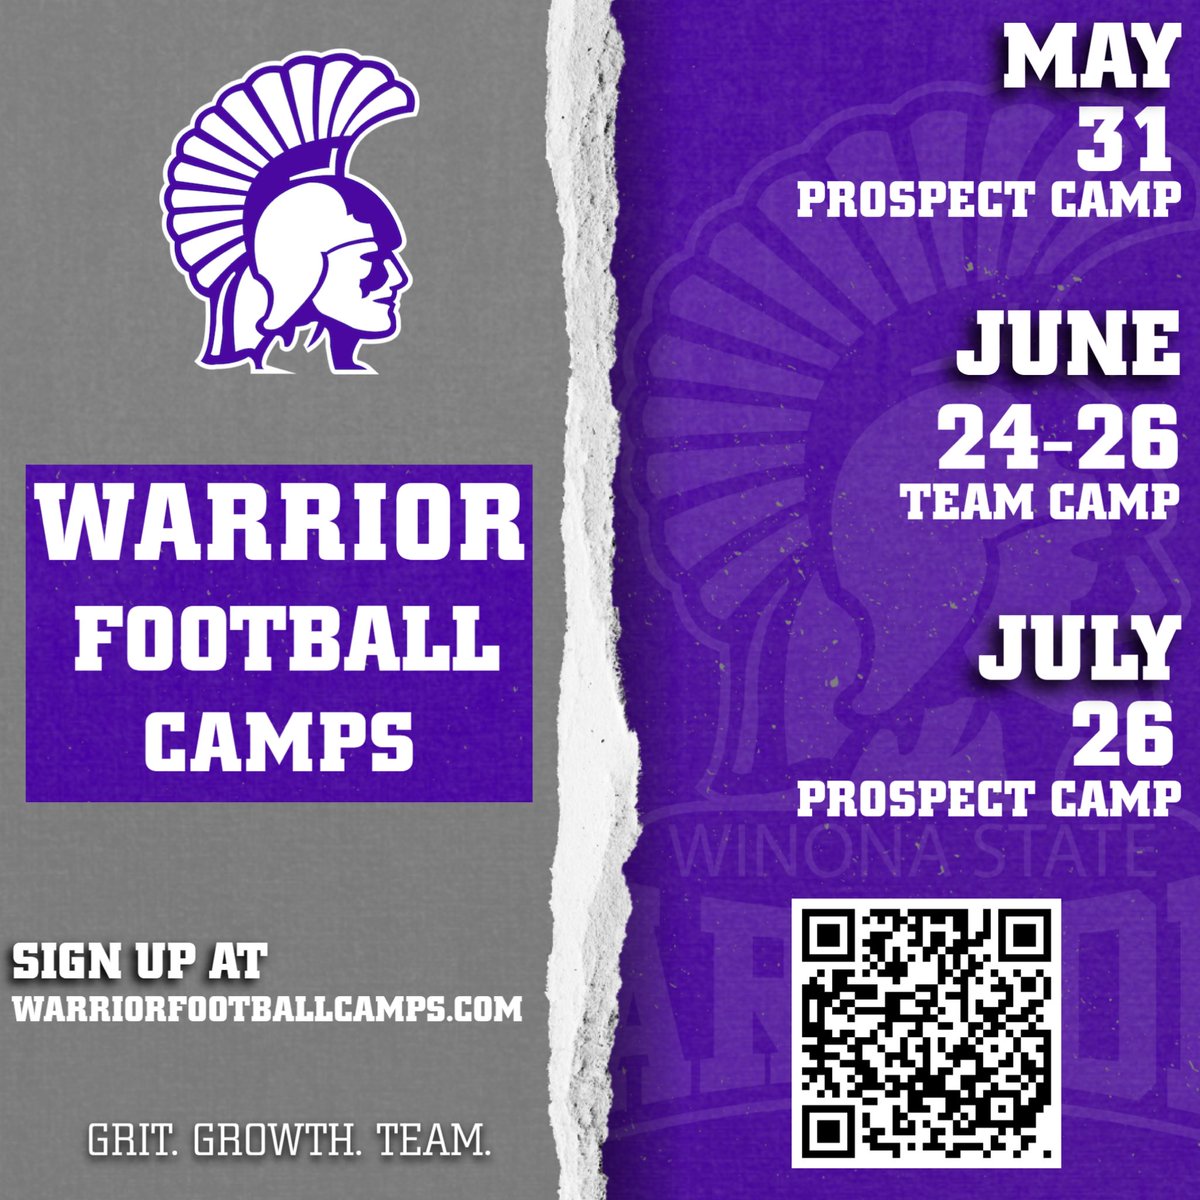 Camp season is right around the corner. Sign up today and improve your skills while competing with some of the best! 🔗warriorfootballcamps.com